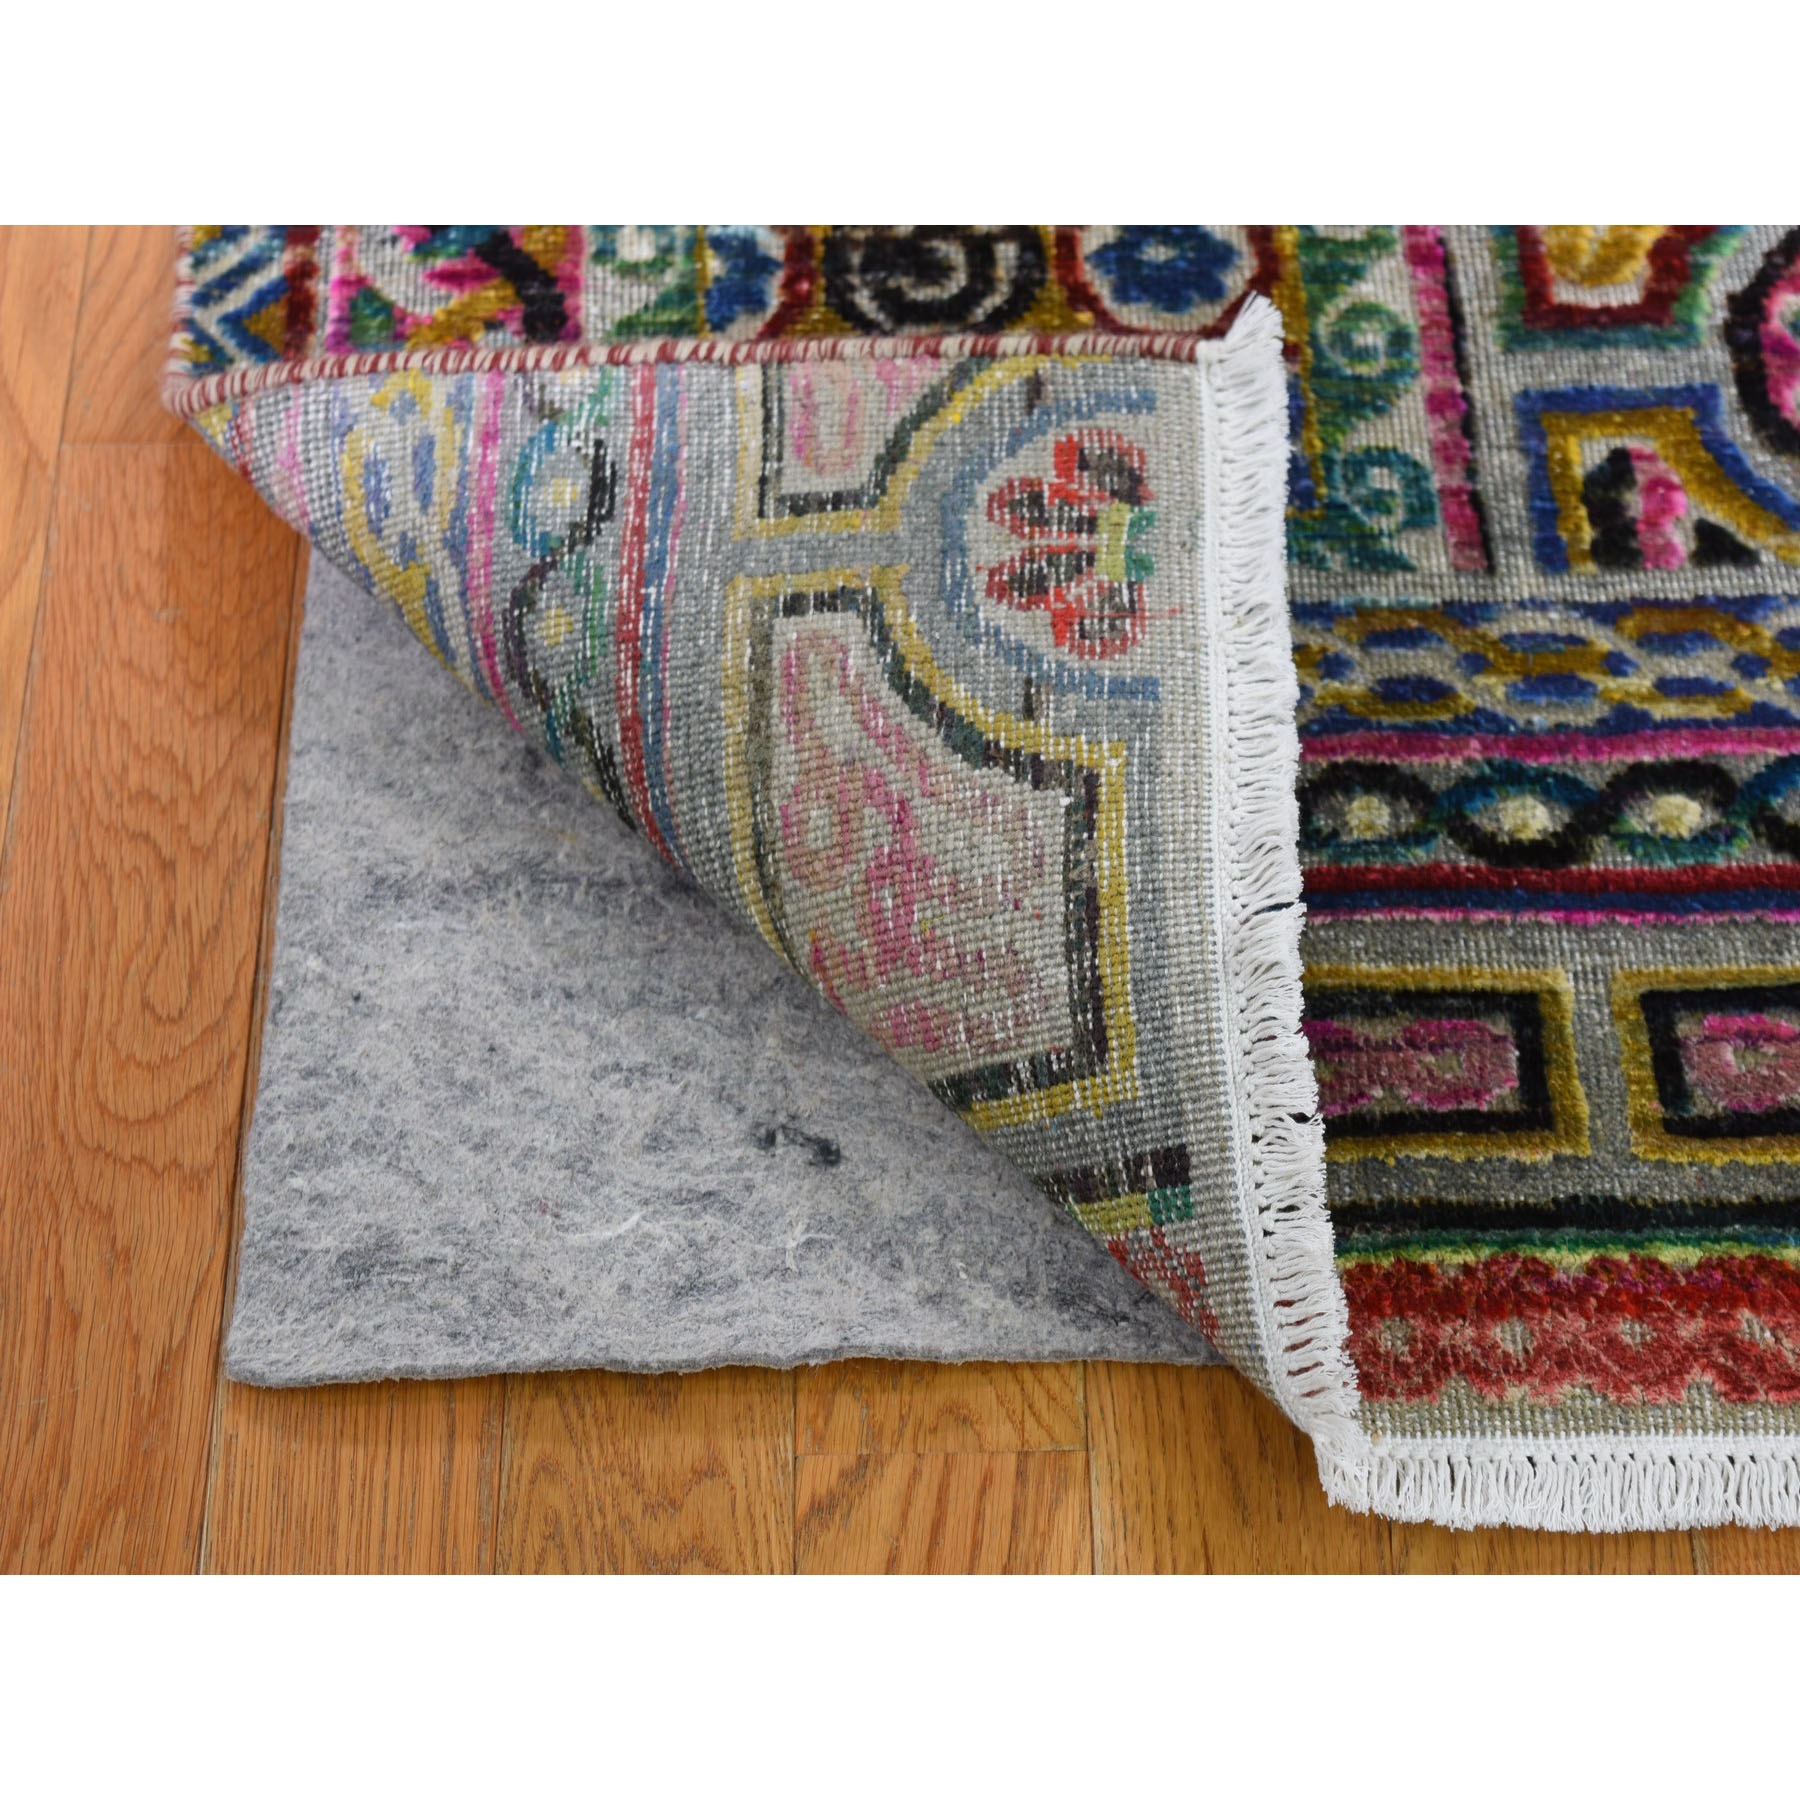 1-10 x3- Sampler Sari Silk With Textured Wool Arts And Crafts Hand-Knotted Oriental Rug 